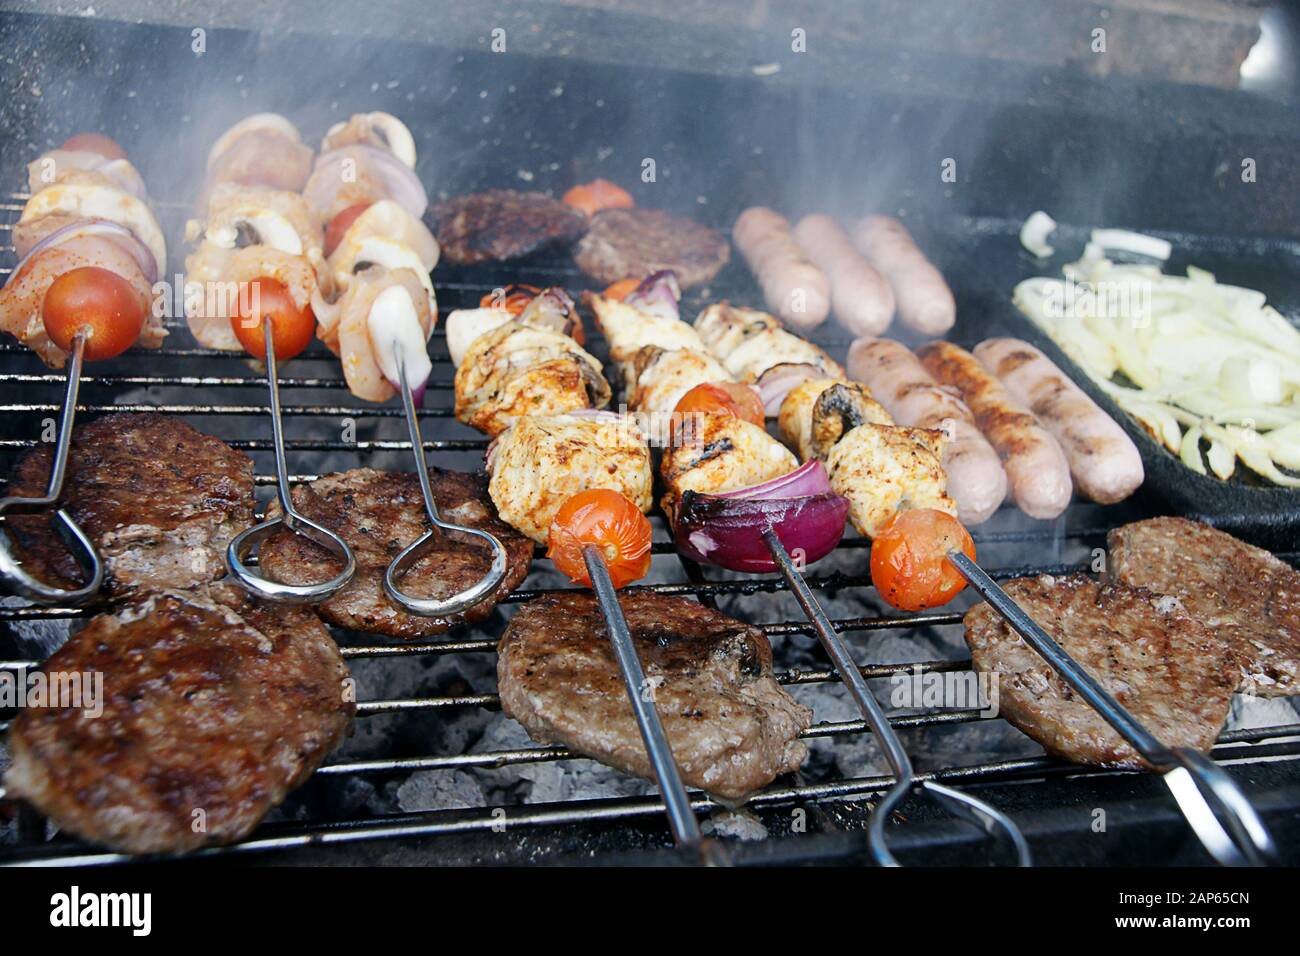 barbeque, bar-b-q, outdoor cooking, Australian Barbecue Stock Photo